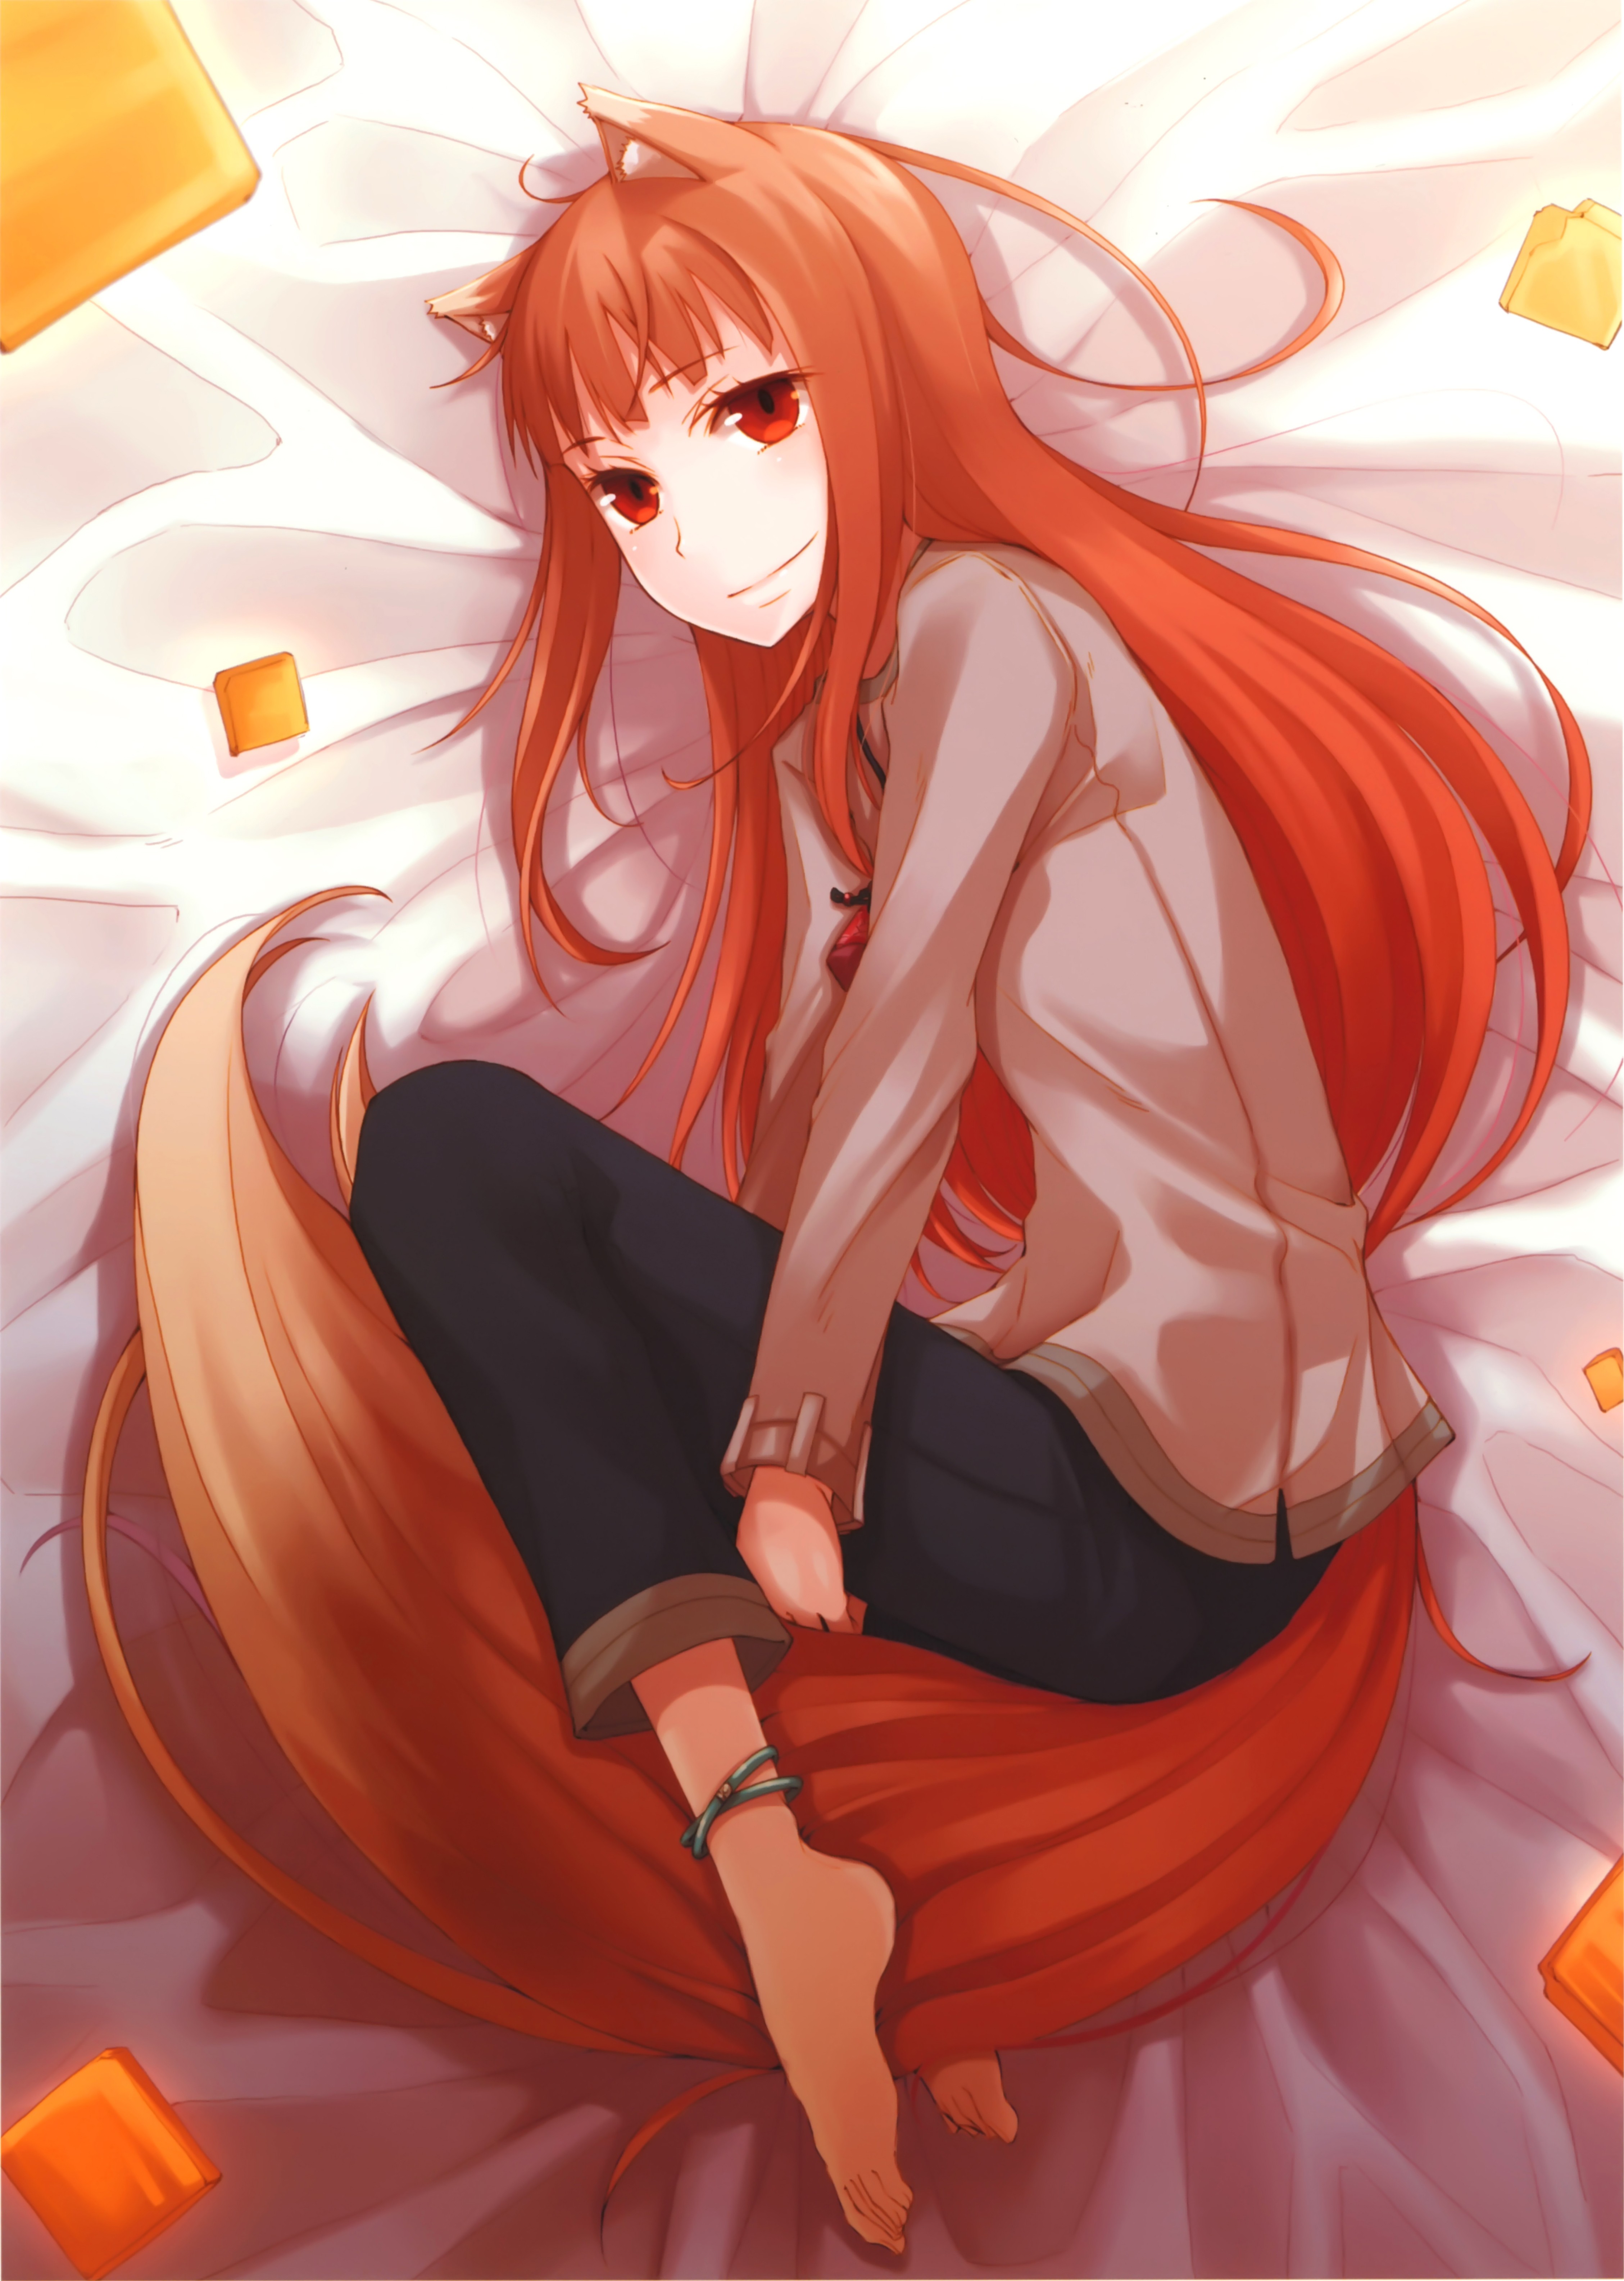 Spice And Wolf Anime Girls Holo Spice And Wolf Long Hair Red Eyes 4514x6339